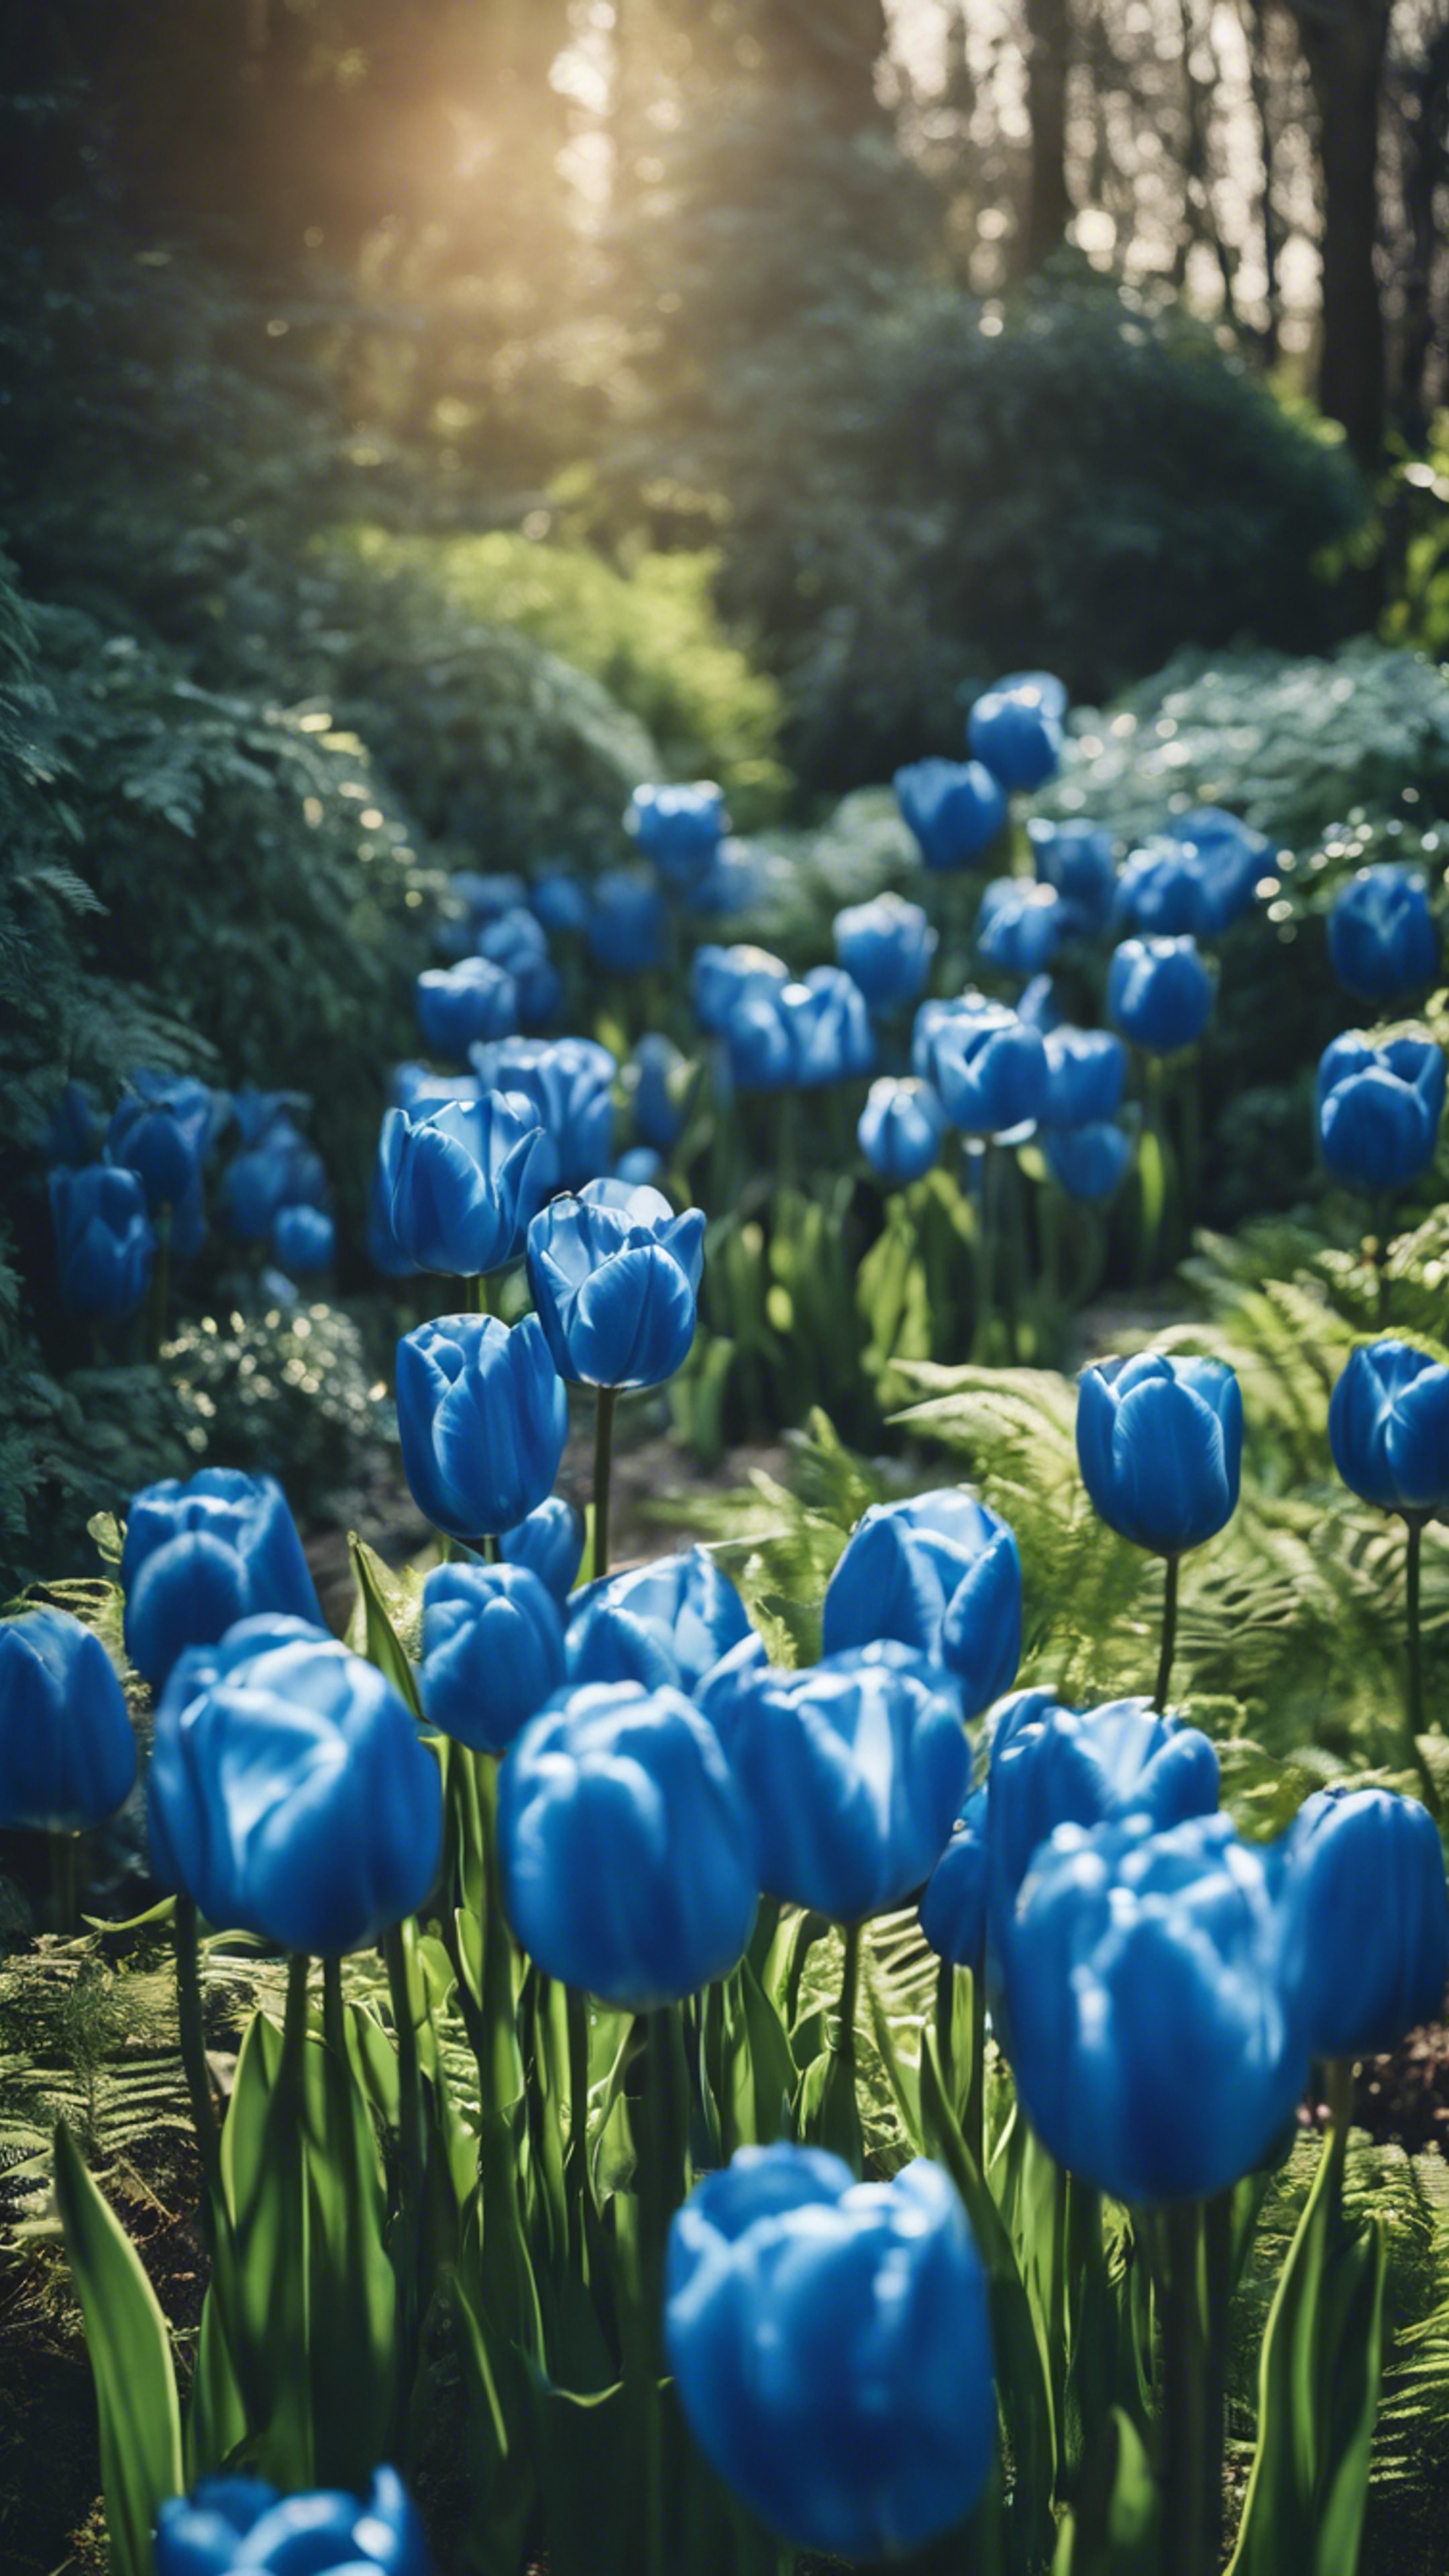 A vibrant illustration of blue tulips amidst ferns and ivy in a garden at the crack of dawn. Tapeta[e8b6b27cf94f4f81bdac]